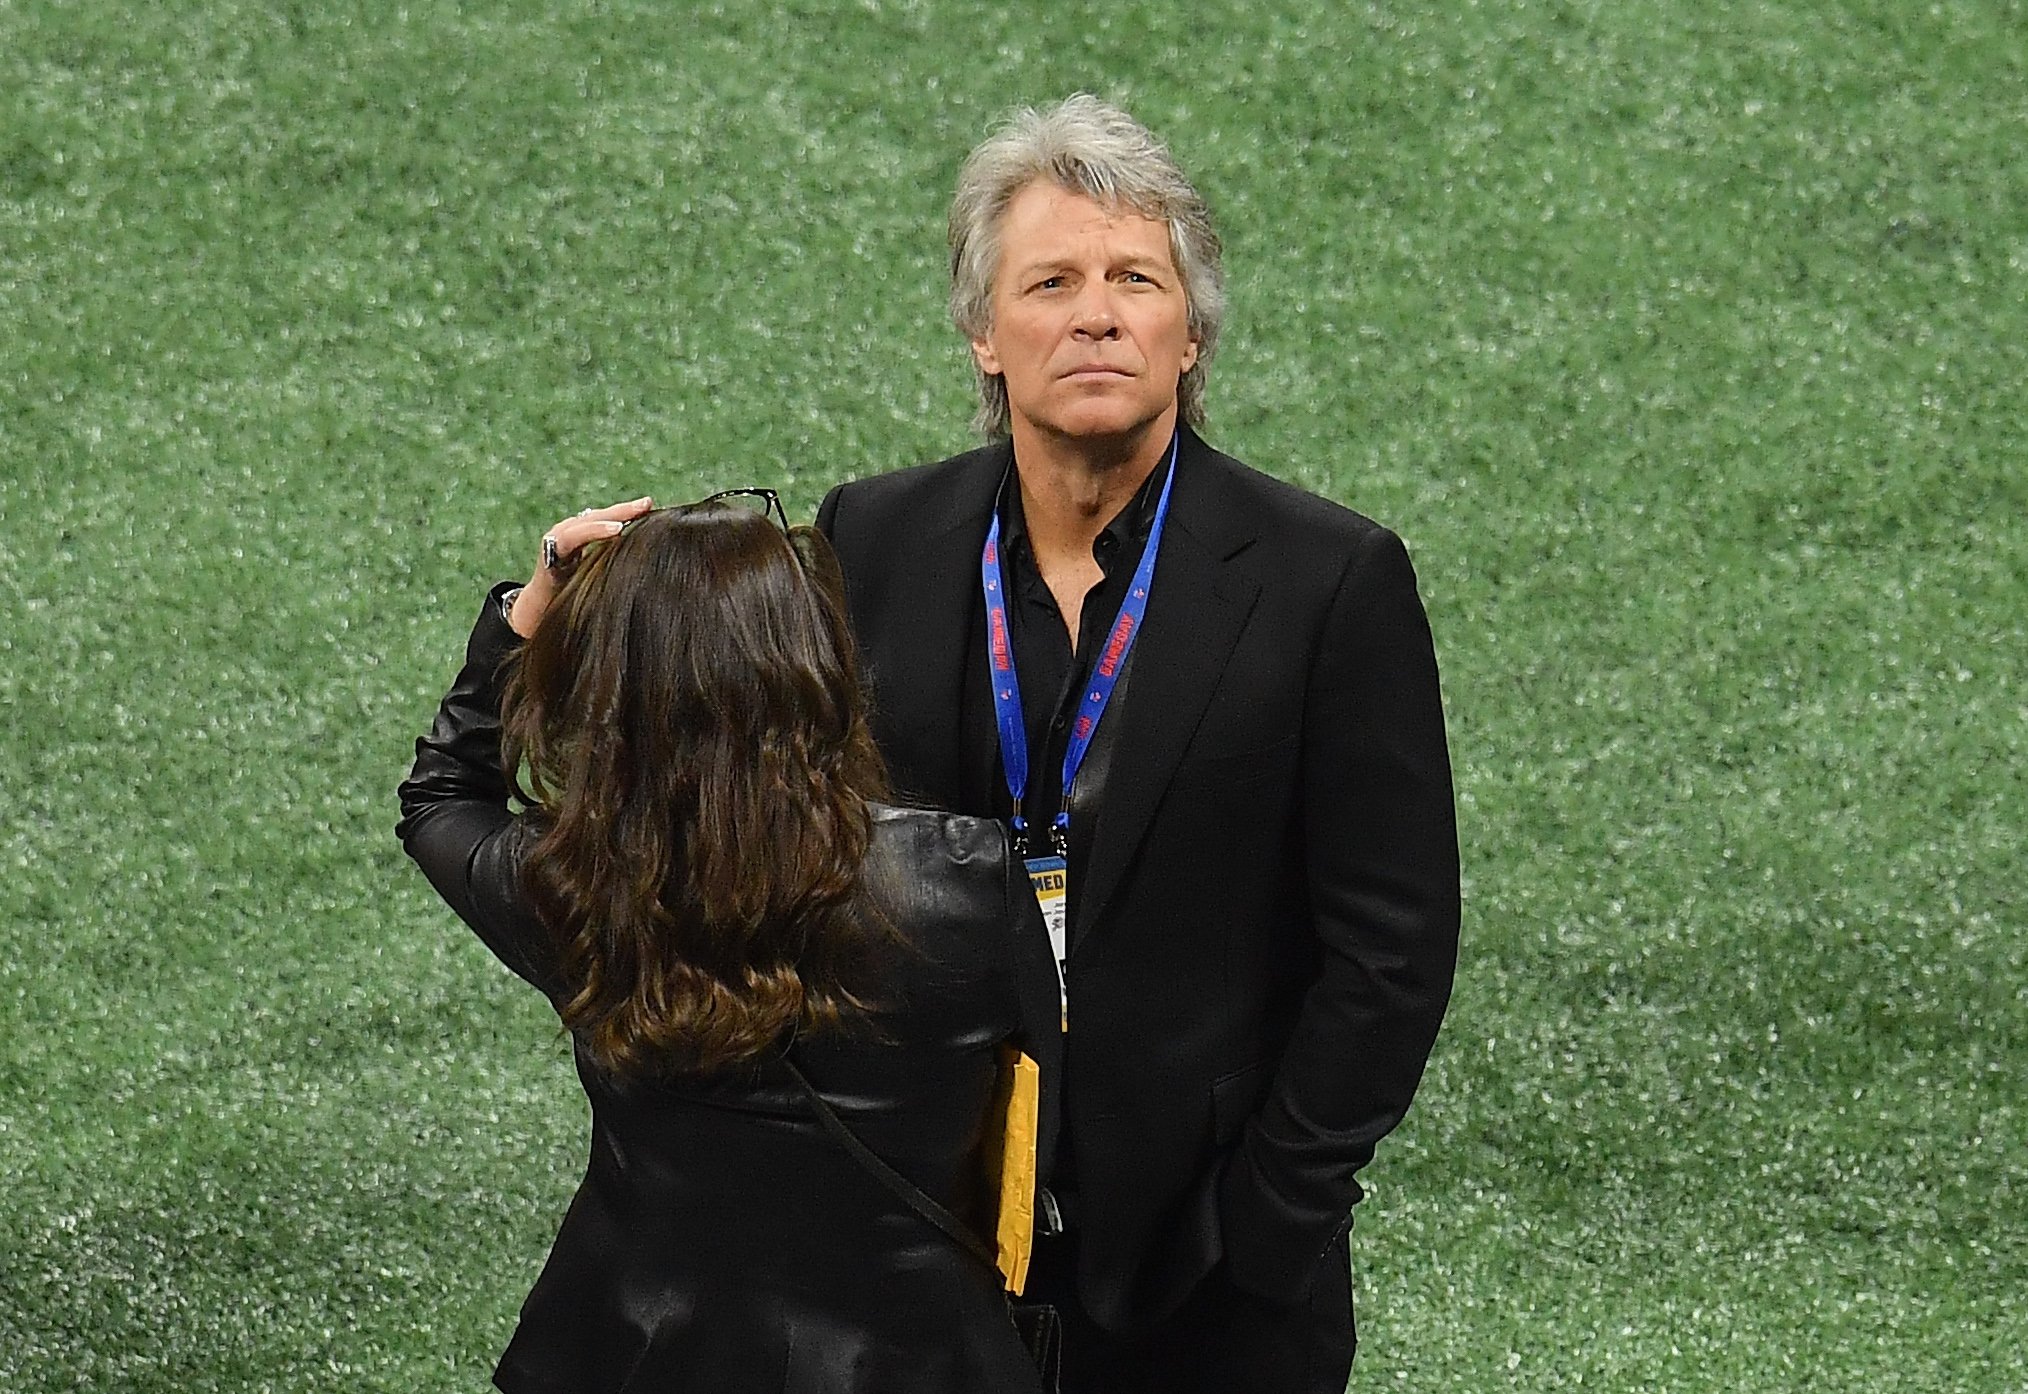 Jon Bon Jovi before the\\u00a0start of Super Bowl LIII played by the New England Patriots and the Los Angeles Rams at Mercedes-Benz Stadium on February 3, 2019, in Atlanta, Georgia. | Source: Getty Images